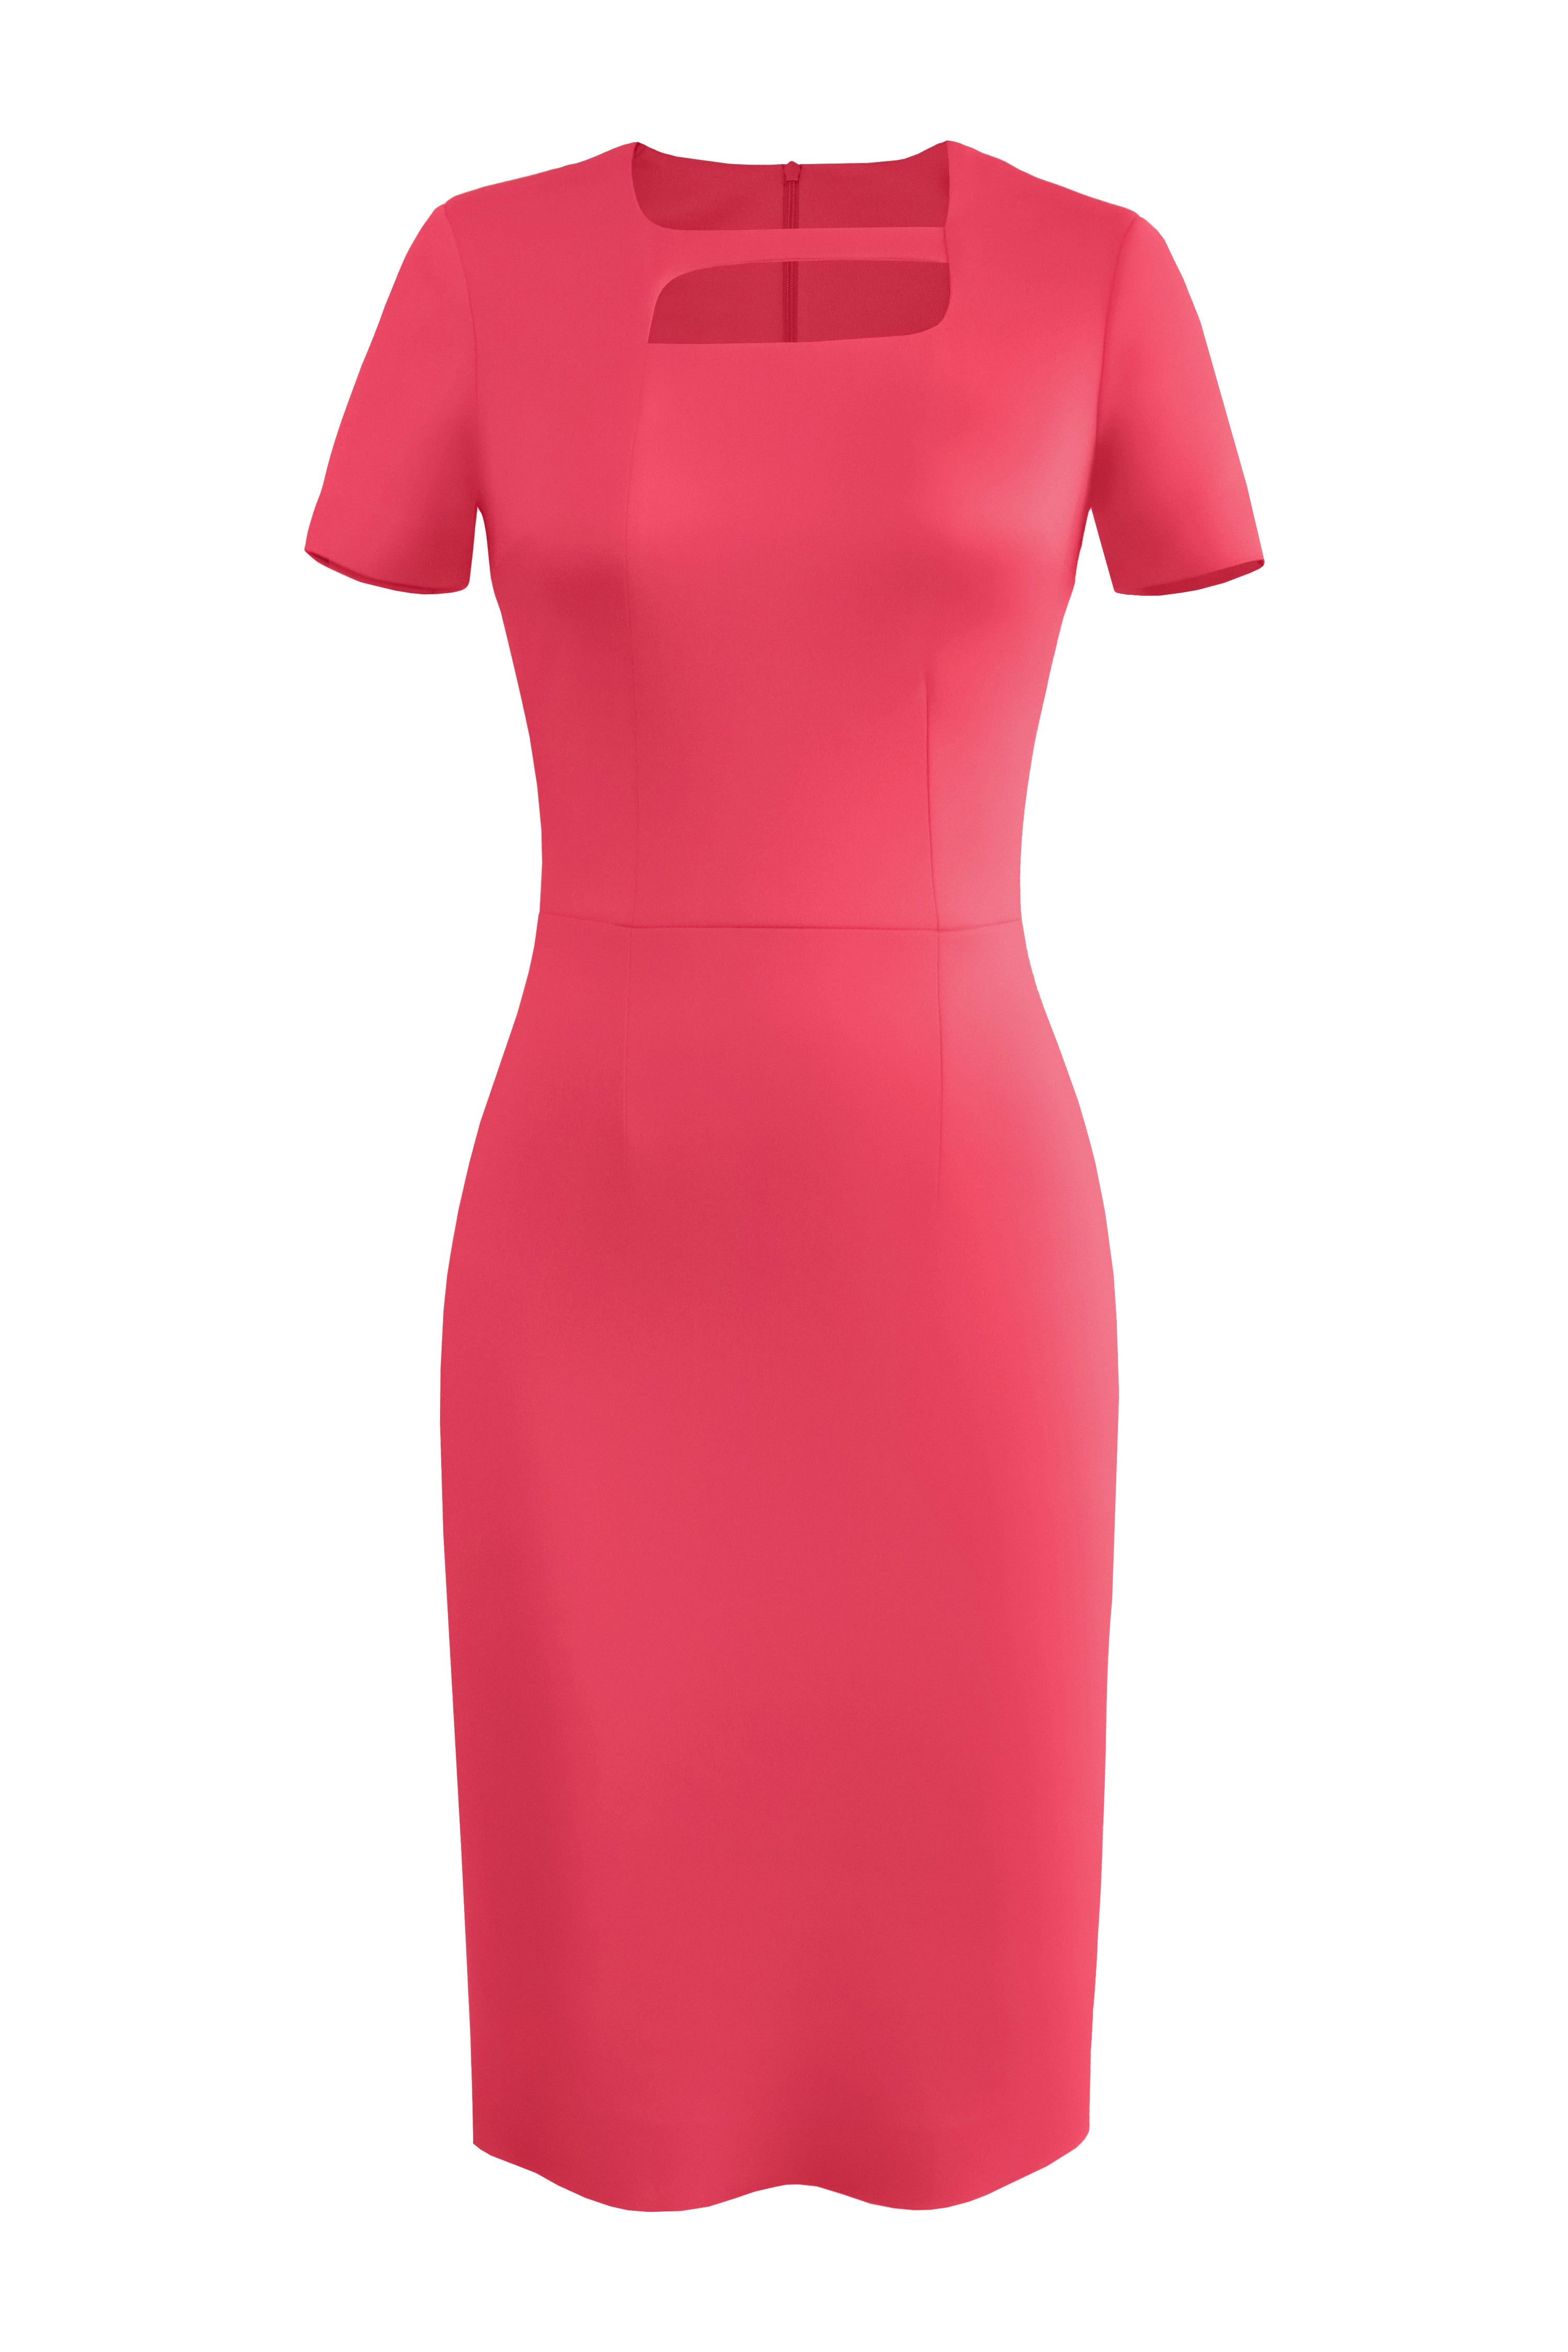 Round Neck Pencil Dress with Accent Lines